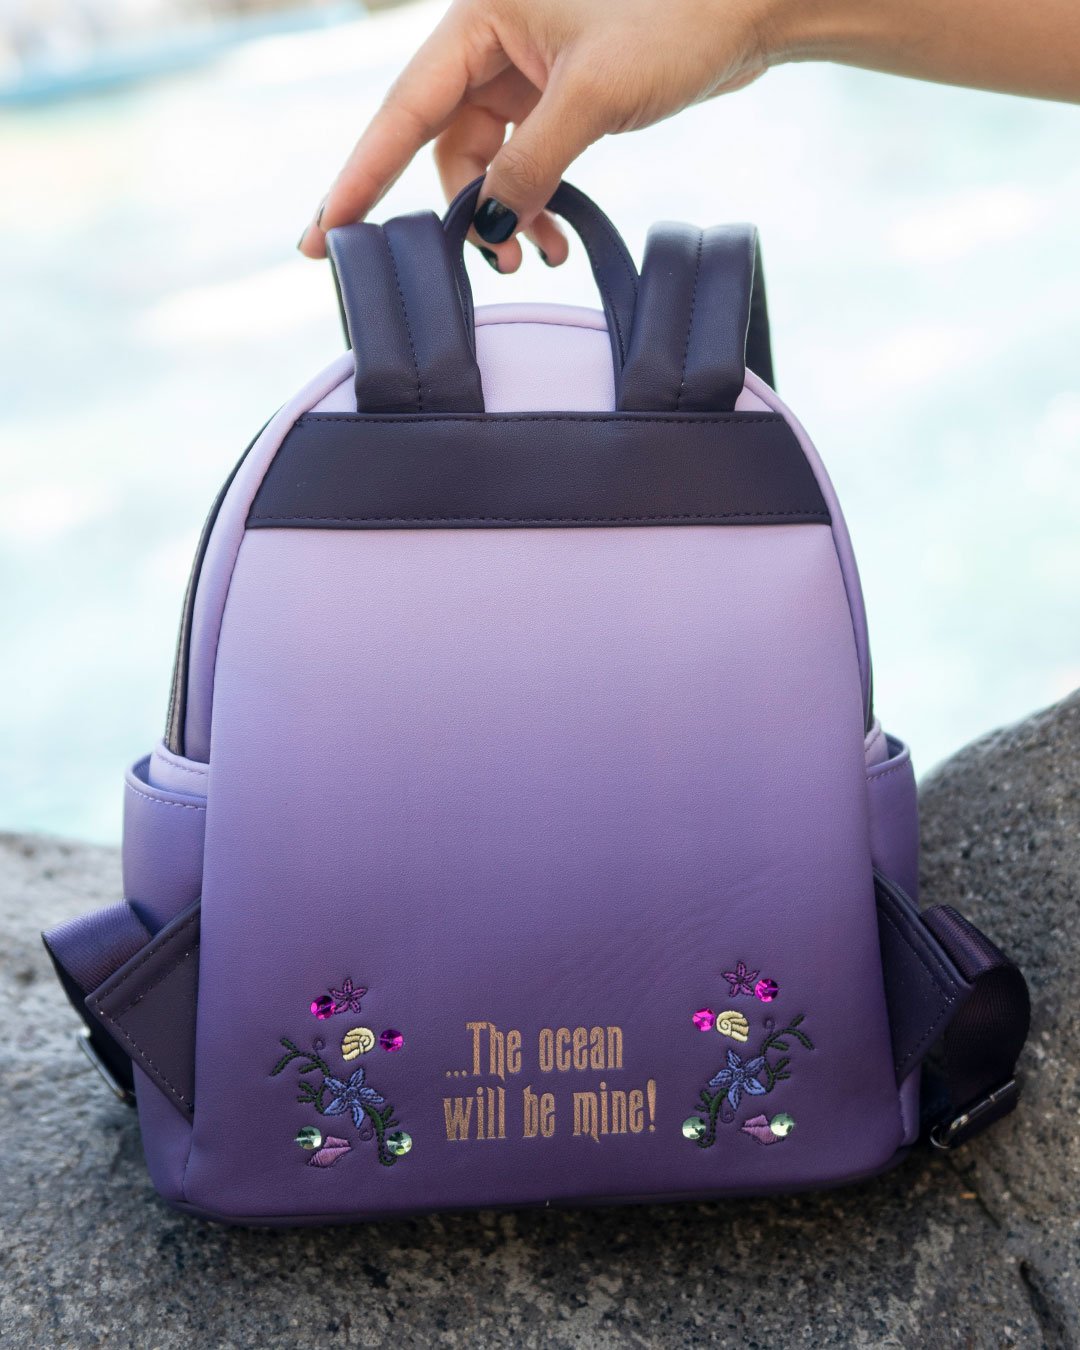 707 Street Exclusive - Loungefly Disney Villains Scene Ursula Mini Backpack - Loungefly Ursula Backpack in Front of Water at Disneyland